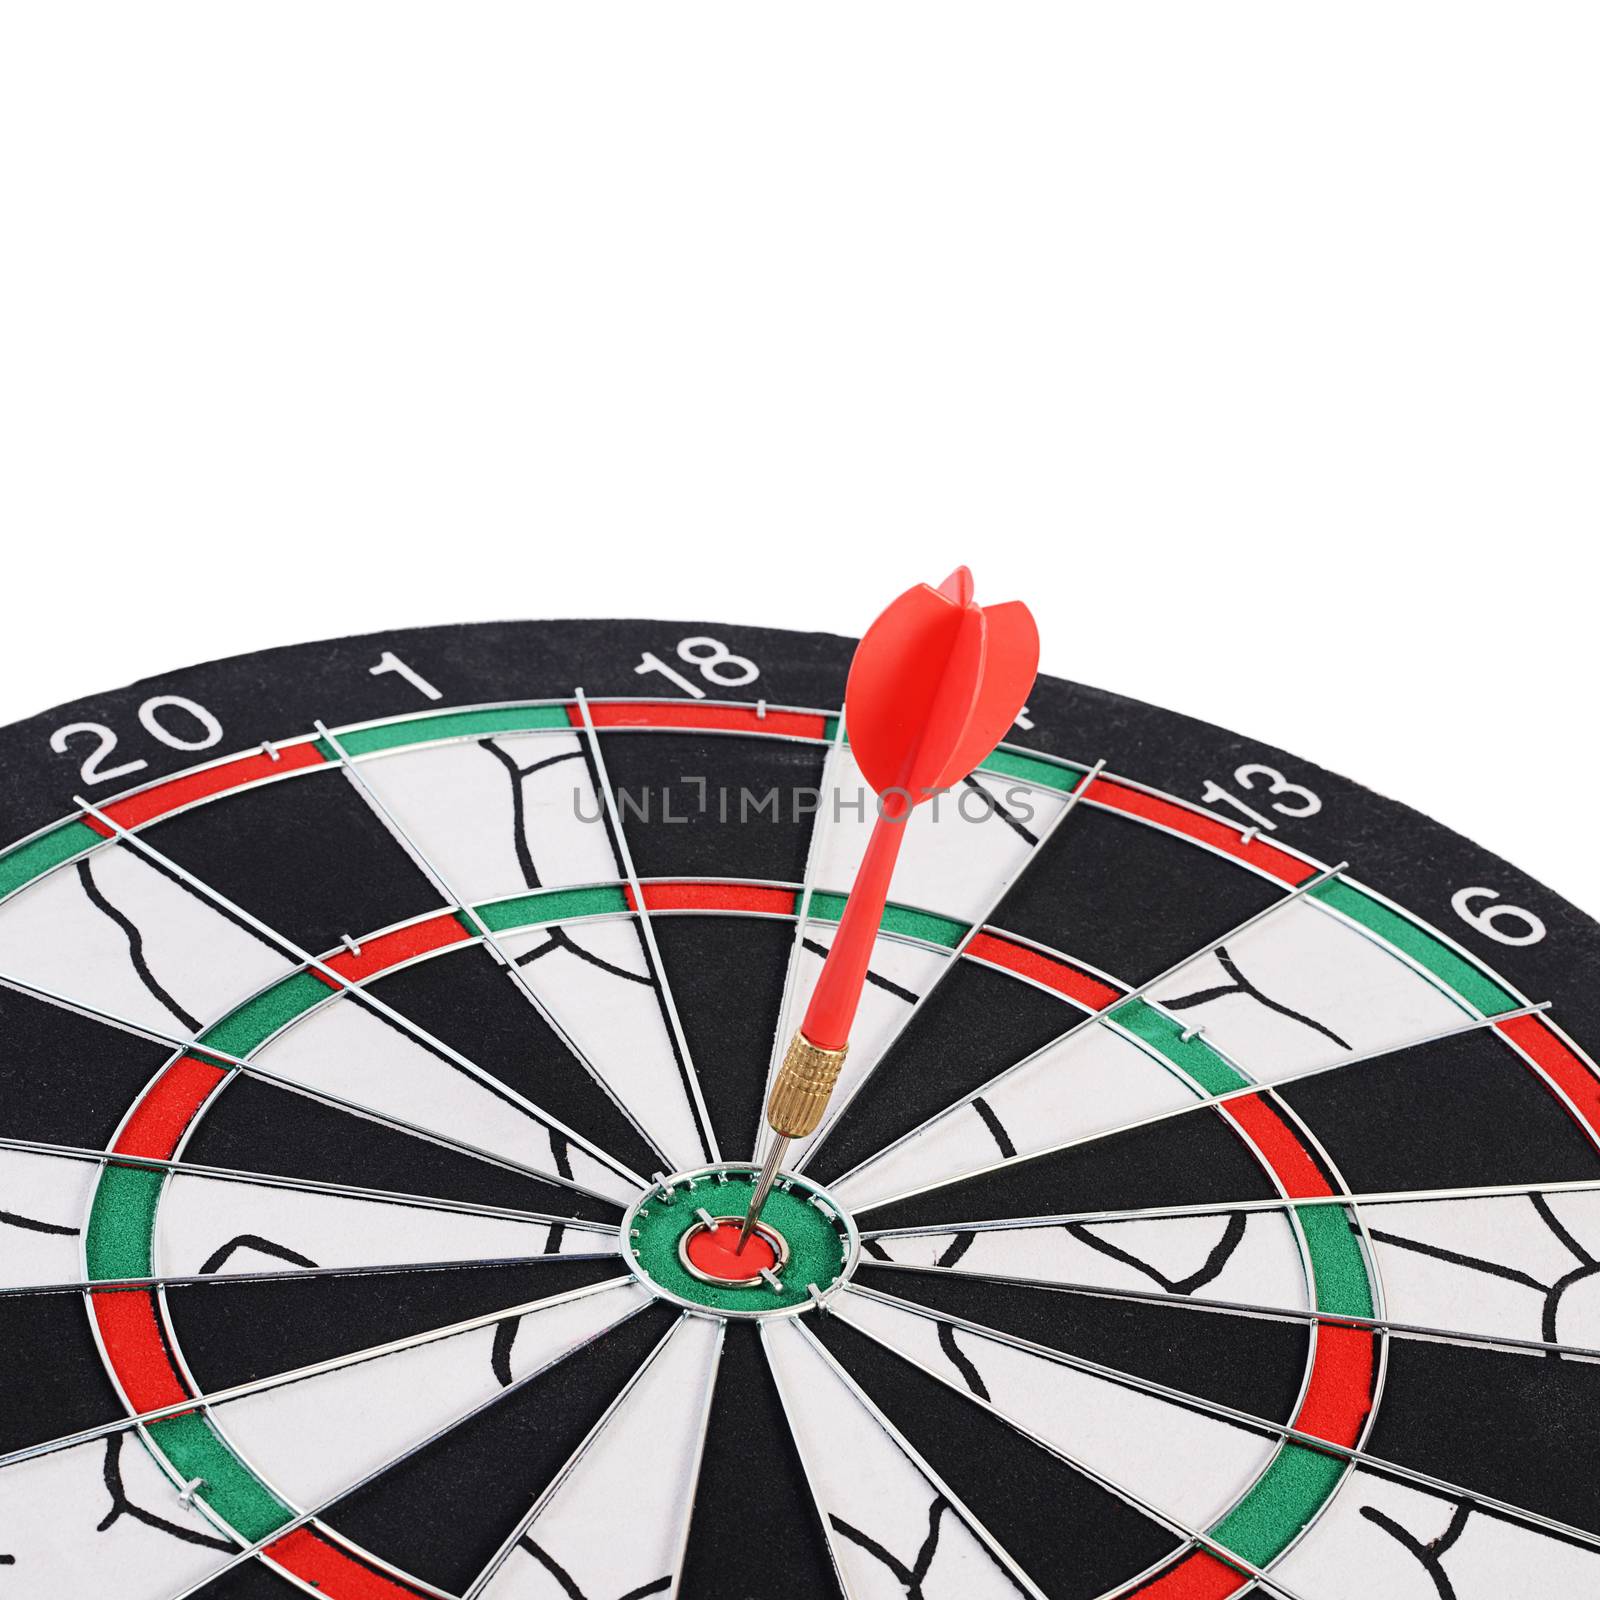 The darts isolated on a  white background